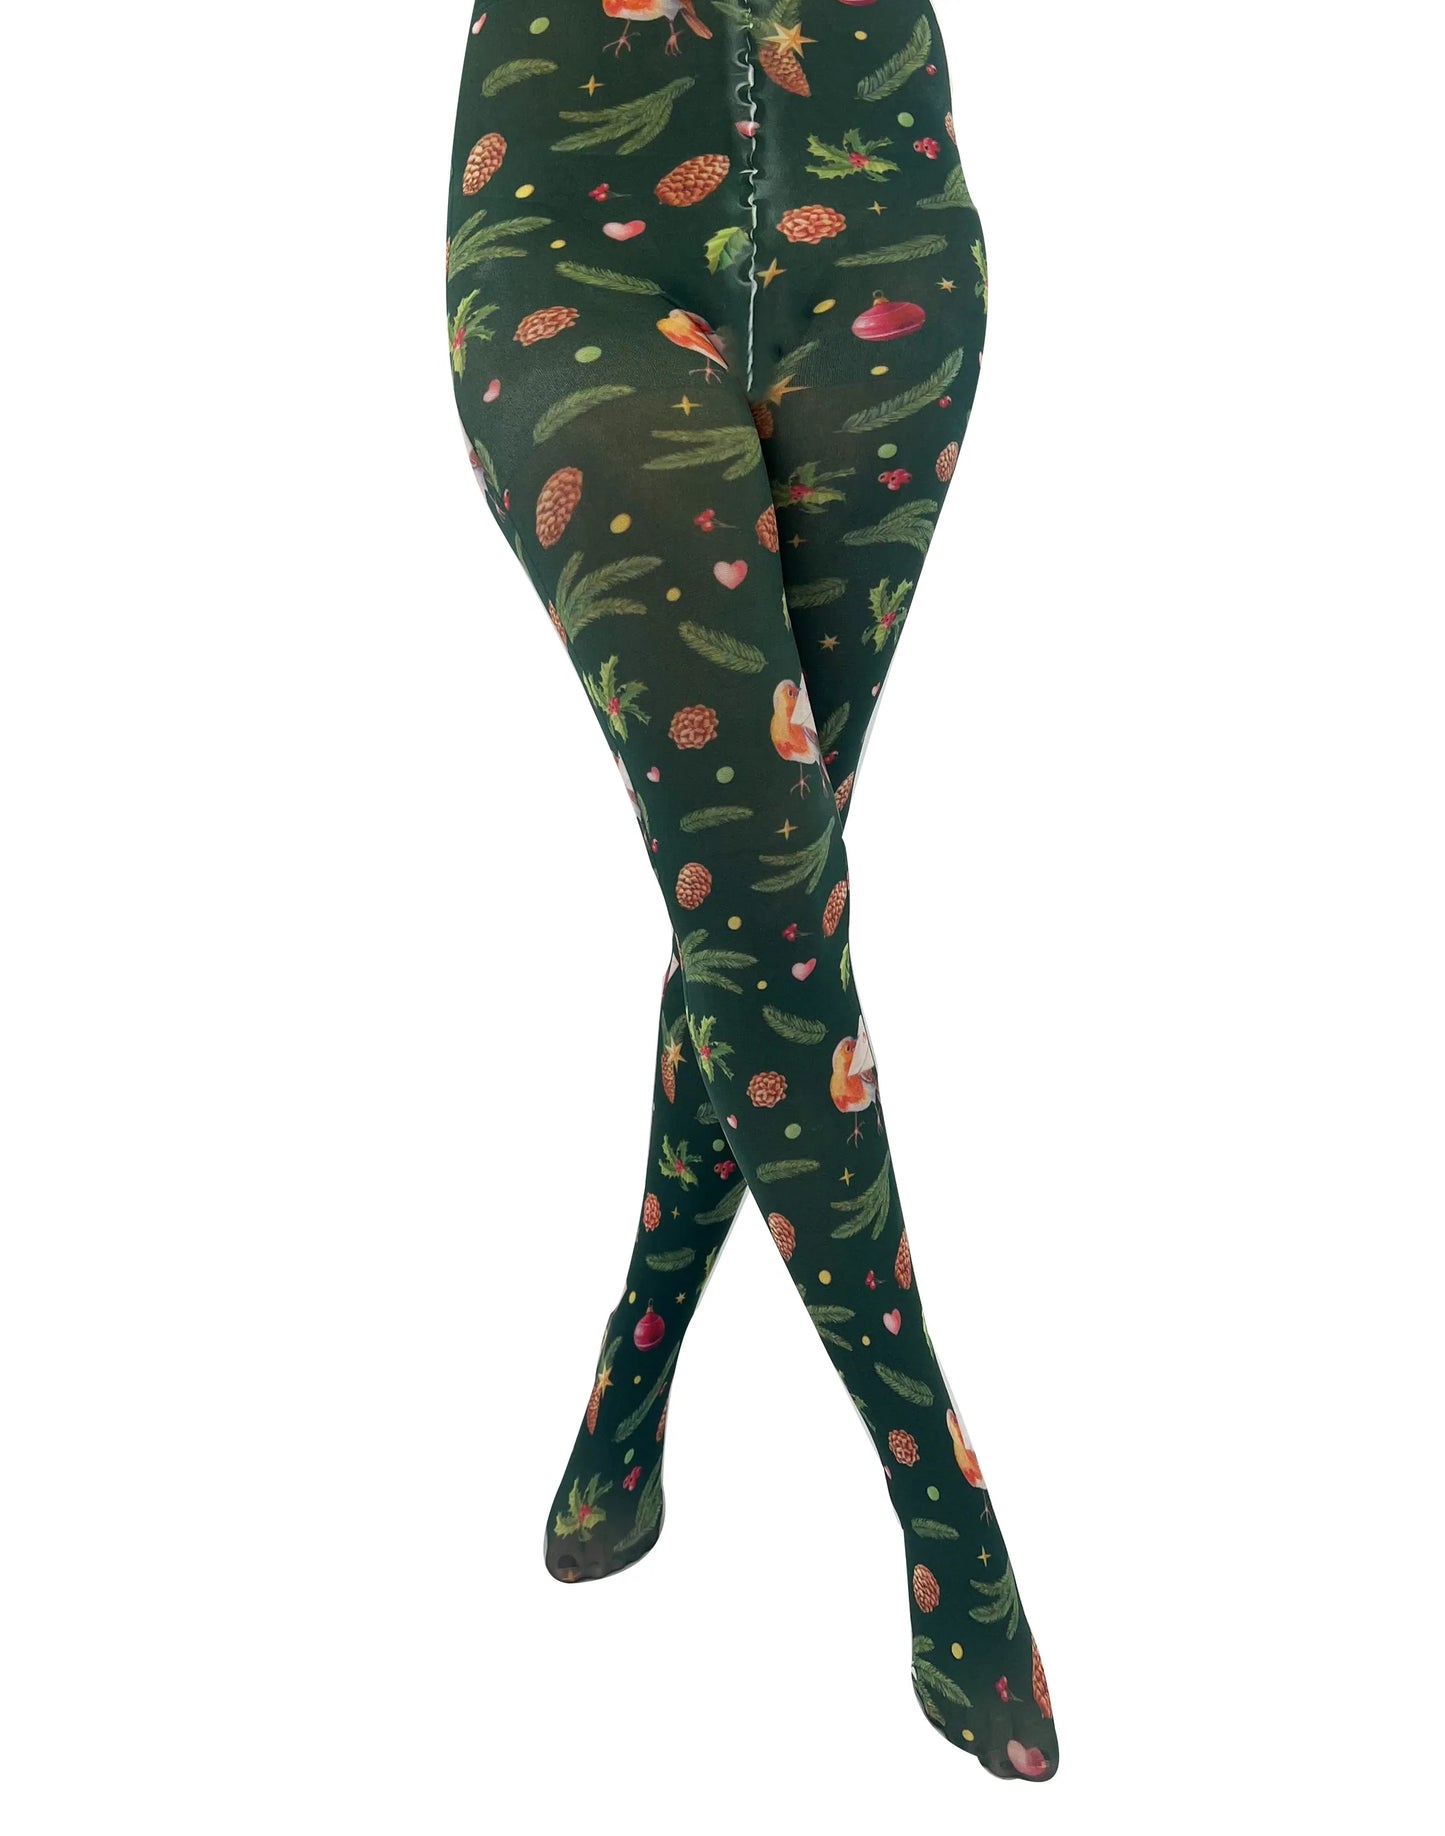 Pamela Mann Robin Printed Tights - White opaque tights with an all over Christmas themed print of Robins delivering letters, holly, pine cones, baubles, stars and hearts on a dark bottle green background.